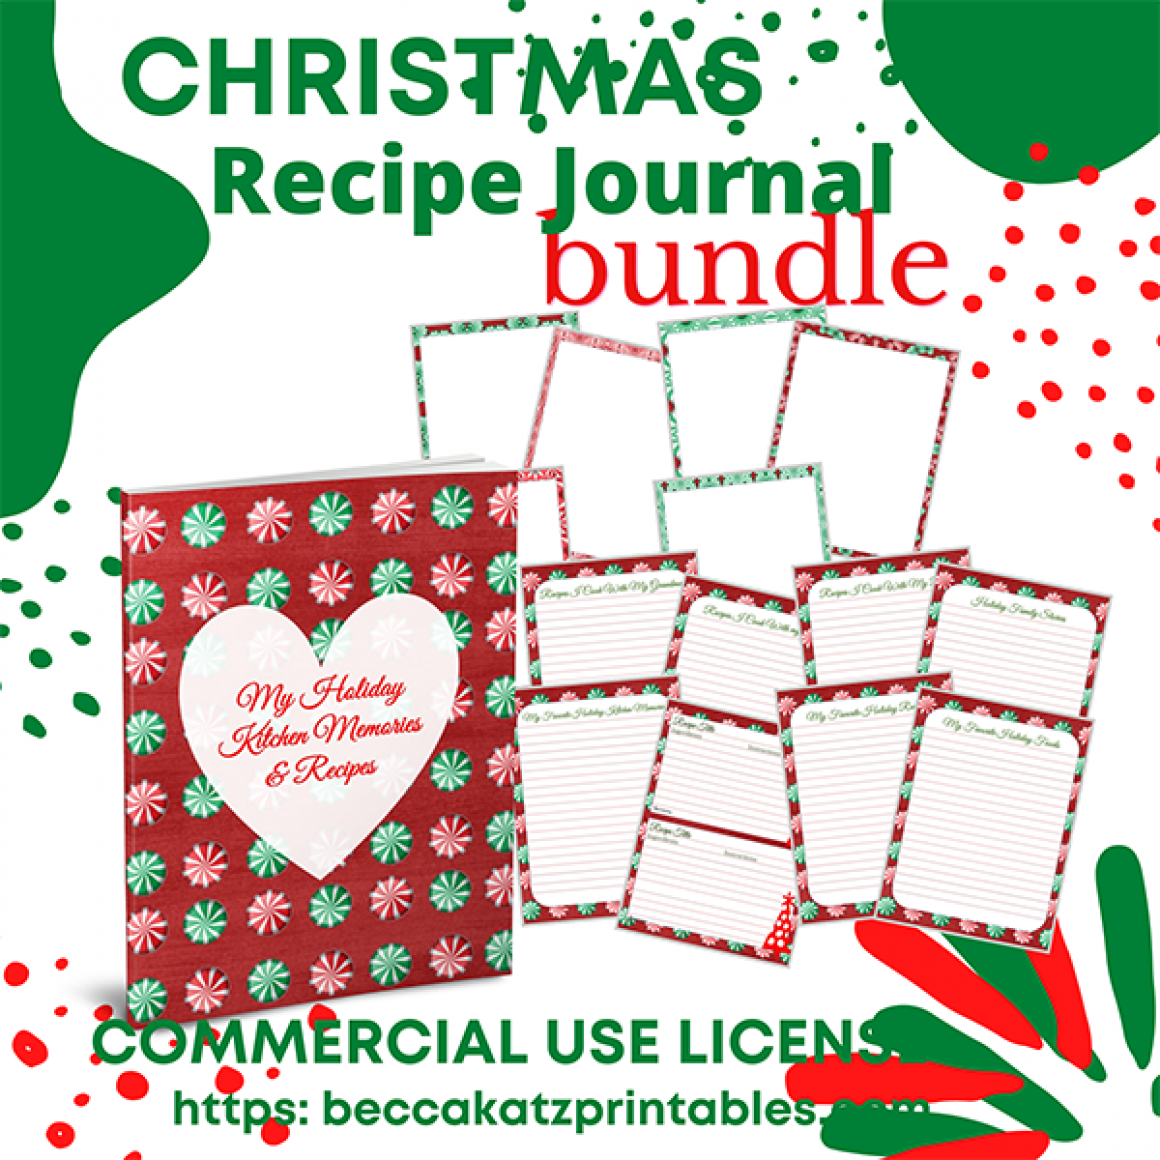 My Holiday Recipes & Memories and Border Pages Bundle